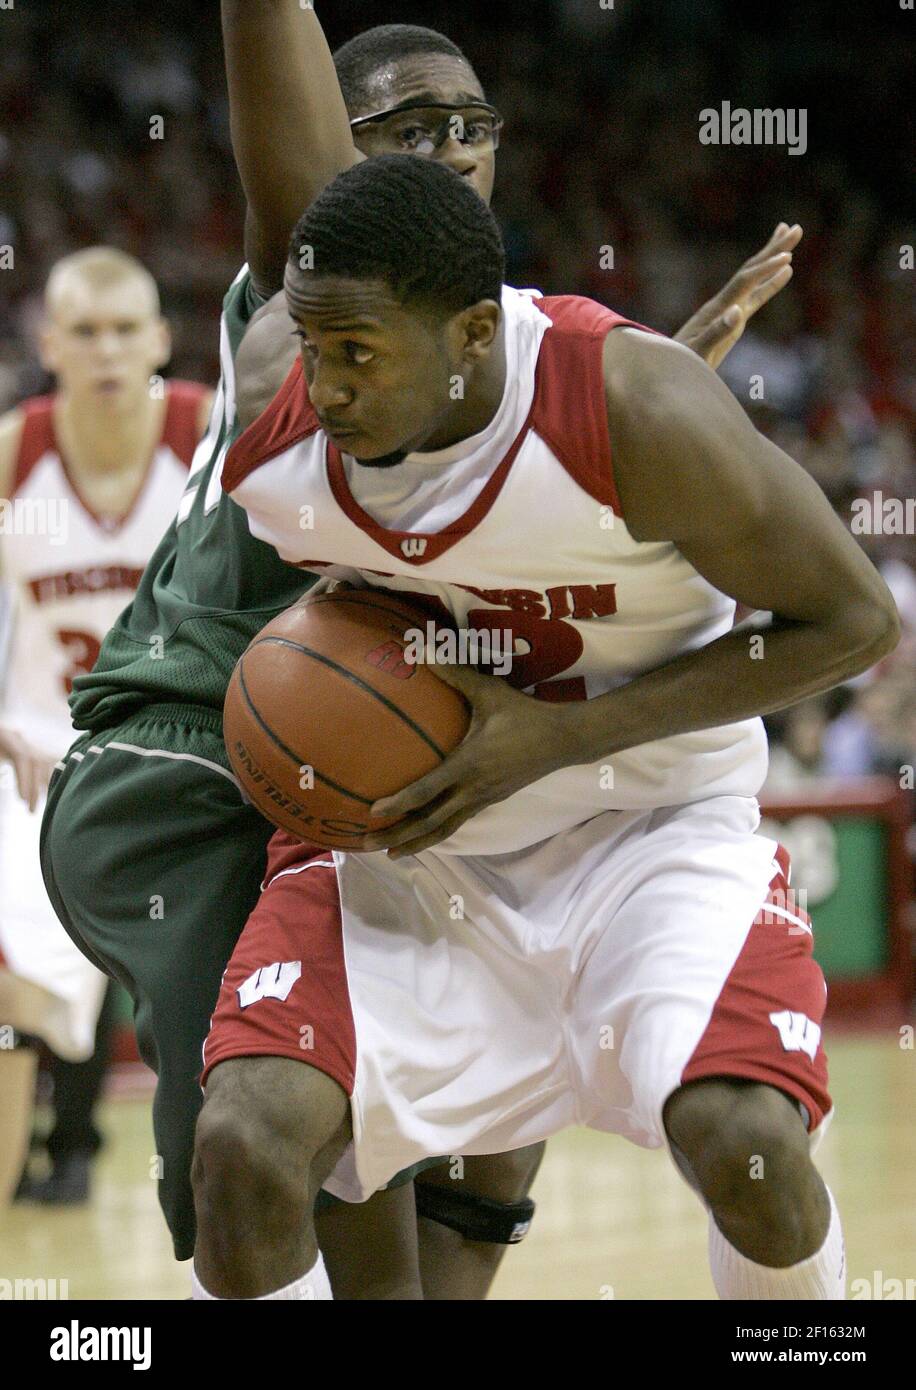 Michigan State's Maurice Joseph throws a hip into Wisconsin's Alando Tucker as he tries to drive the lane in the first half, Saturday, March 3, 2007, in Madison, Wisconsin. The Badgers defeated the Spartans 52-50. (Photo by Joe Koshollek/Milwaukee Journal Sentinel/MCT/Sipa USA) Stock Photo